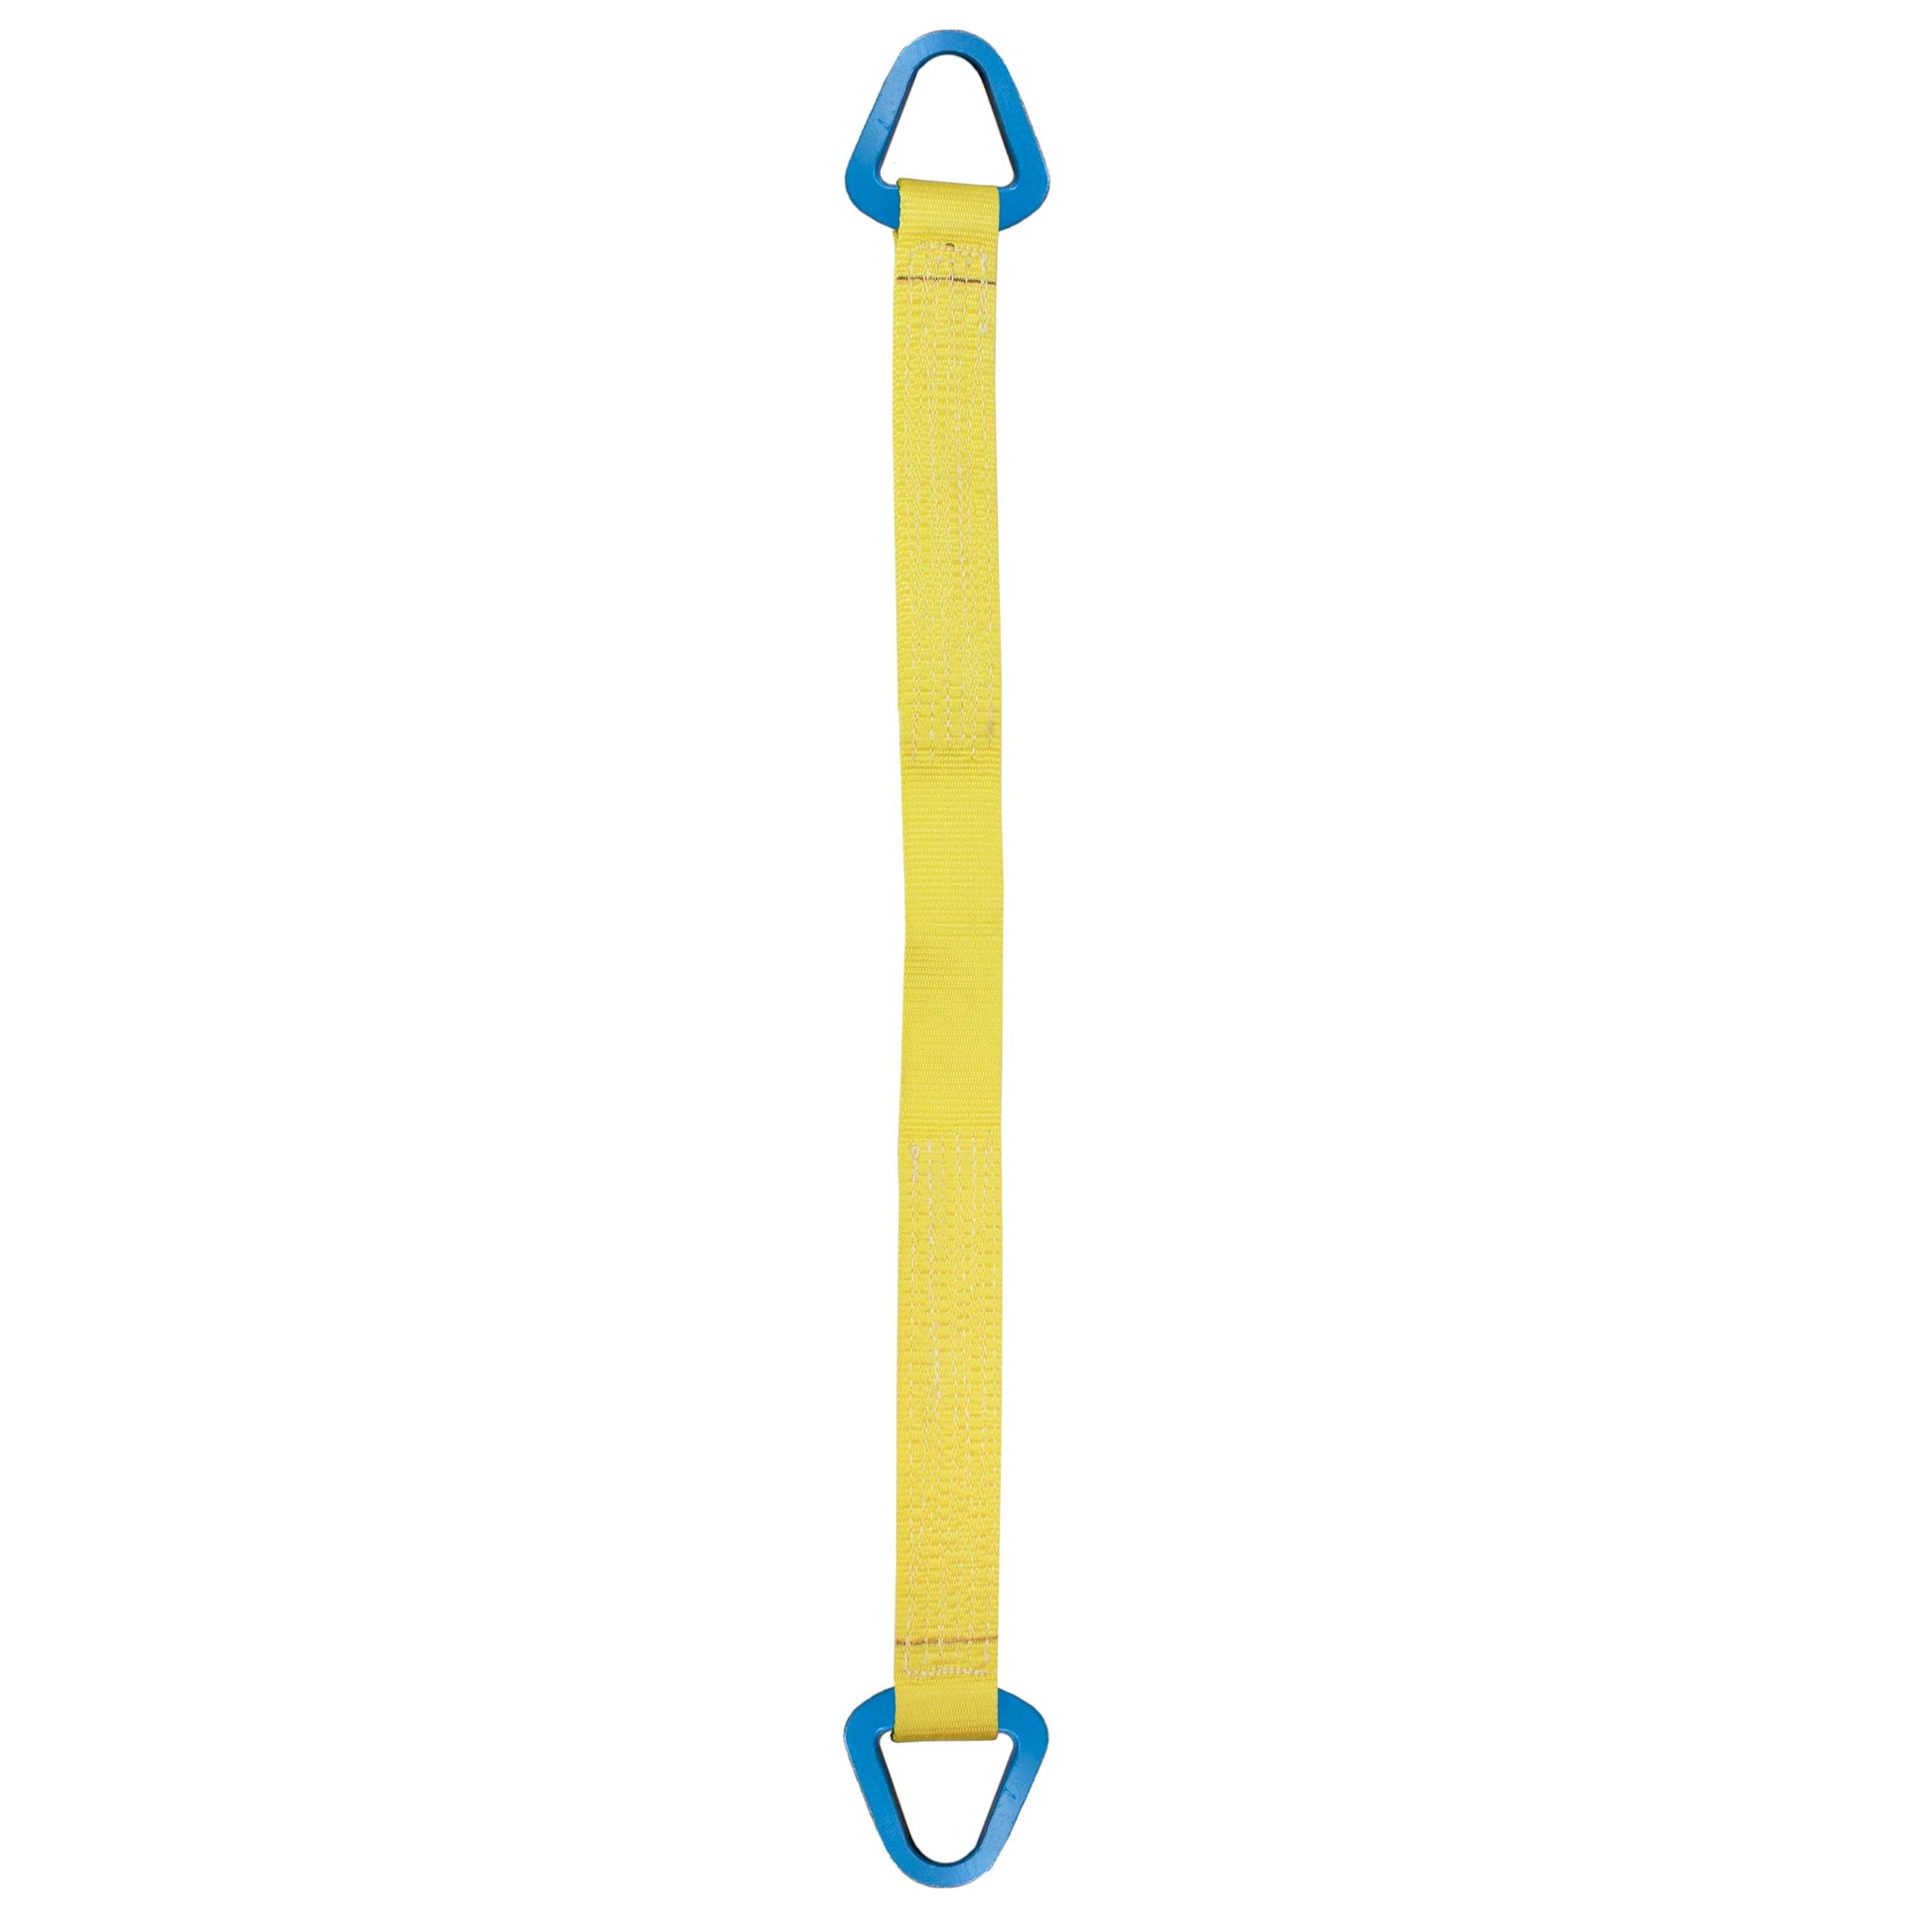 Nylon Lifting Sling Triangle 10 inch x 12 foot 2ply image 1 of 2